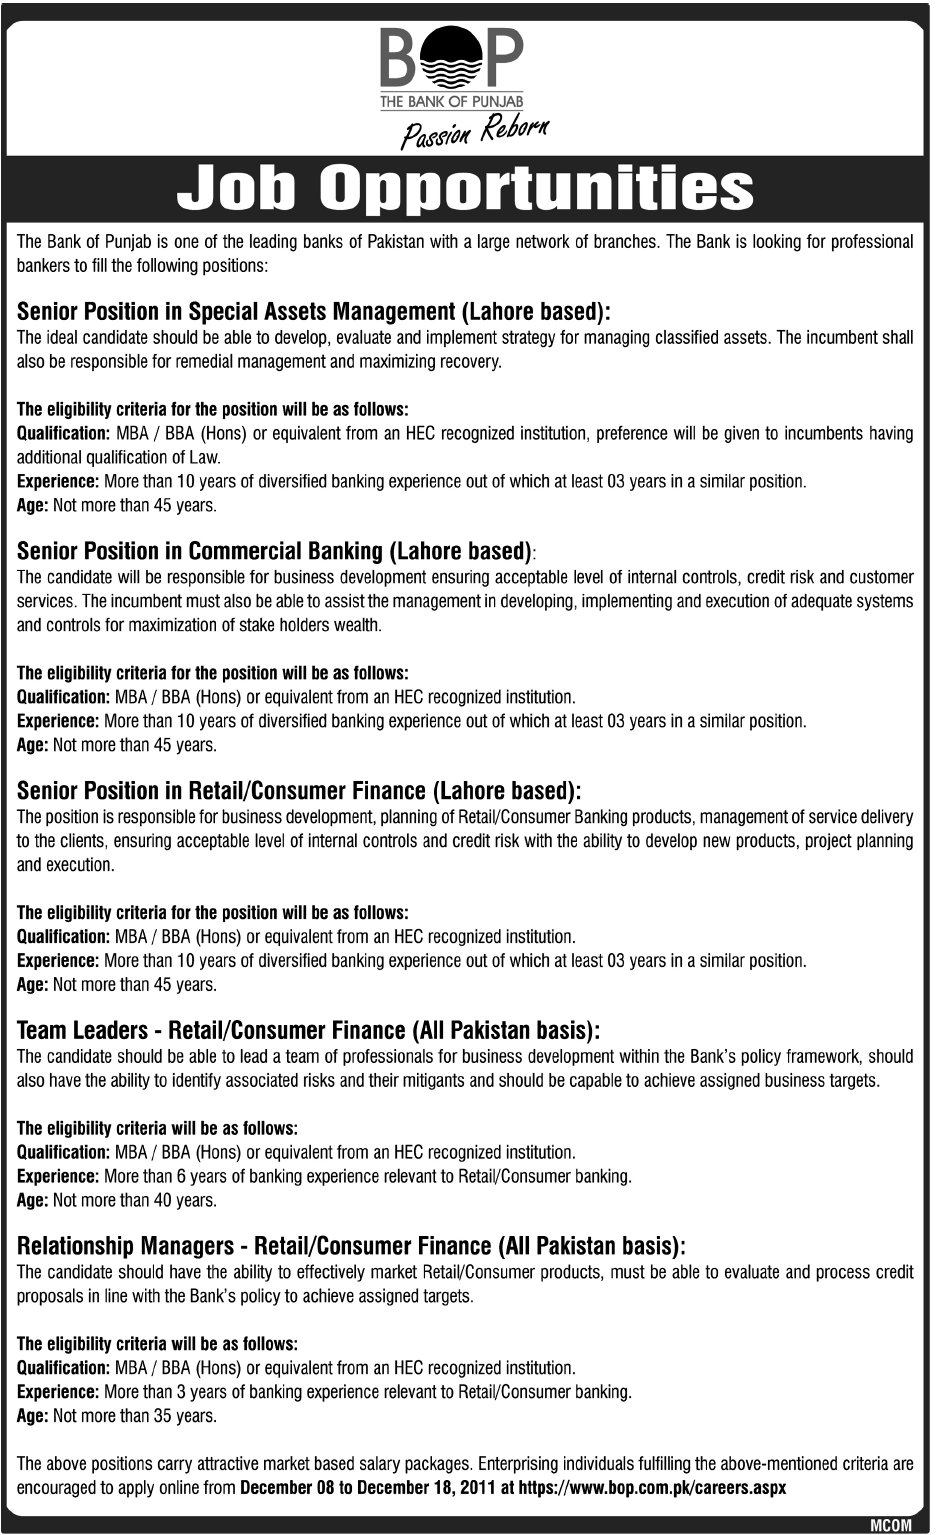 The Bank of Punjab Job Opportunities